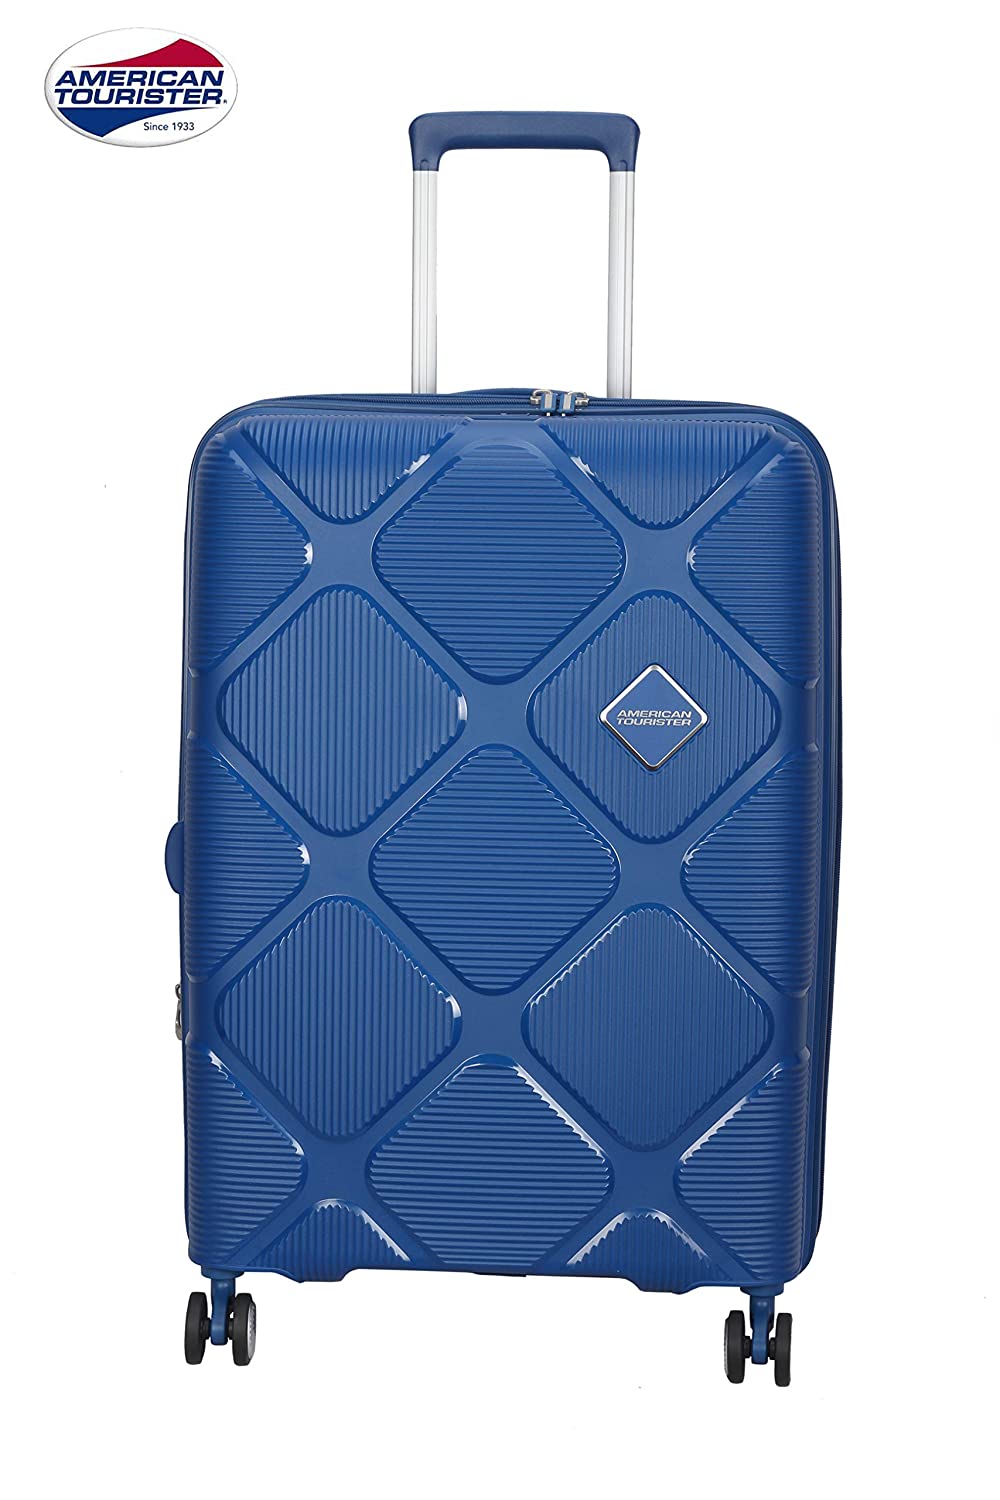 Buy Online American Tourister Brand in Suitcases & Trolley Bags